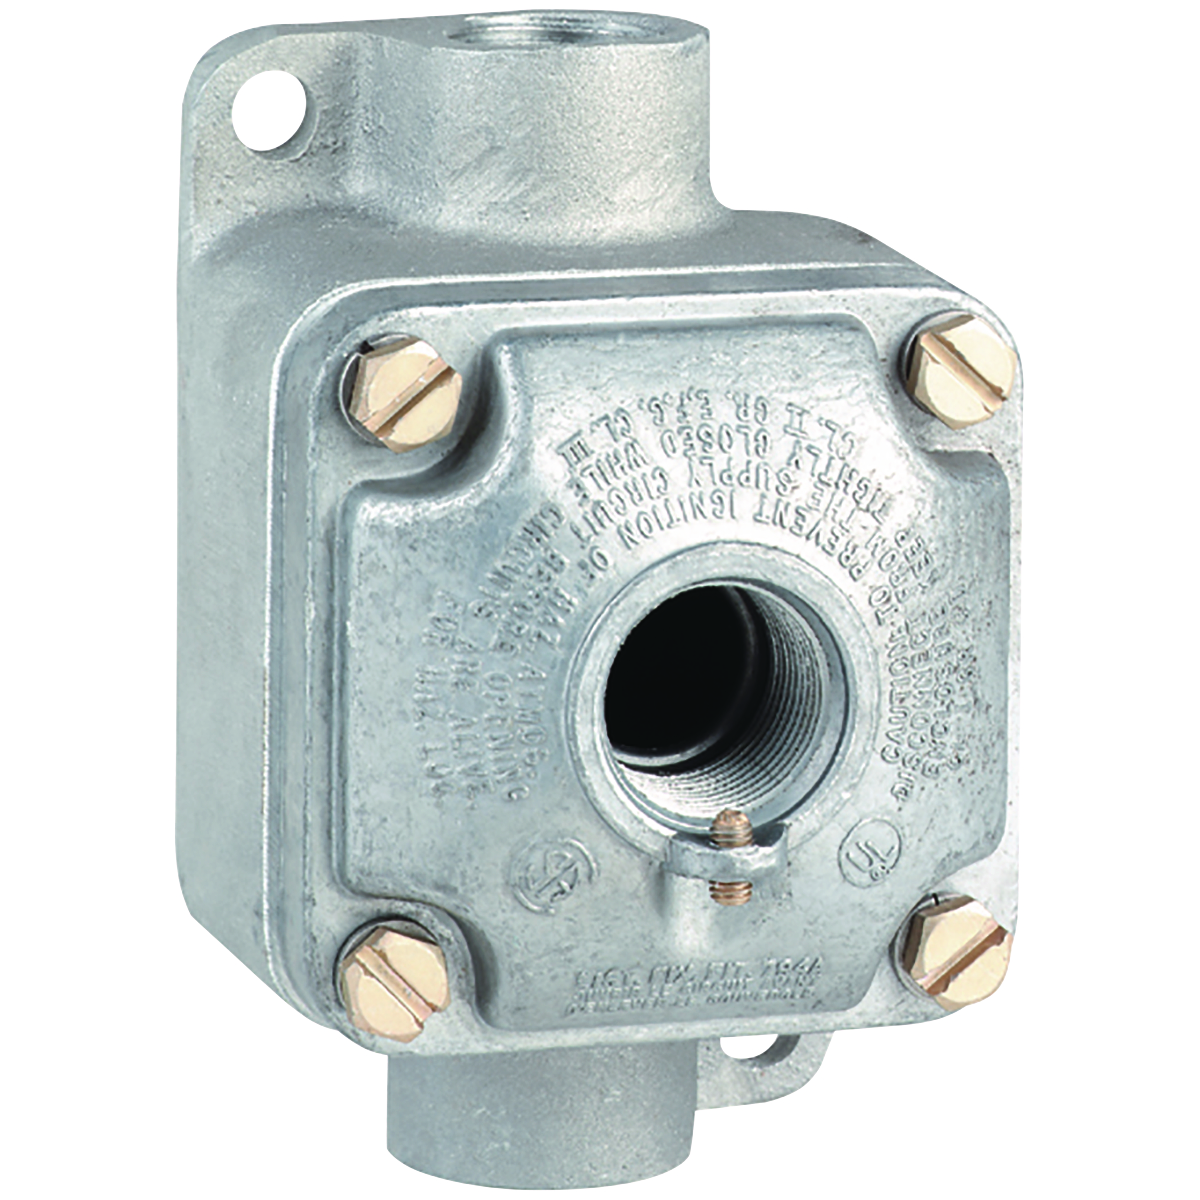 JL SERIES - ALUMINUM OUTLET BODY WITH COVER - WITH HUB COVER - BOX TYPEC - BOX HUB SIZE 3/4 INCH - COVER HUB SIZE 1/2 INCH